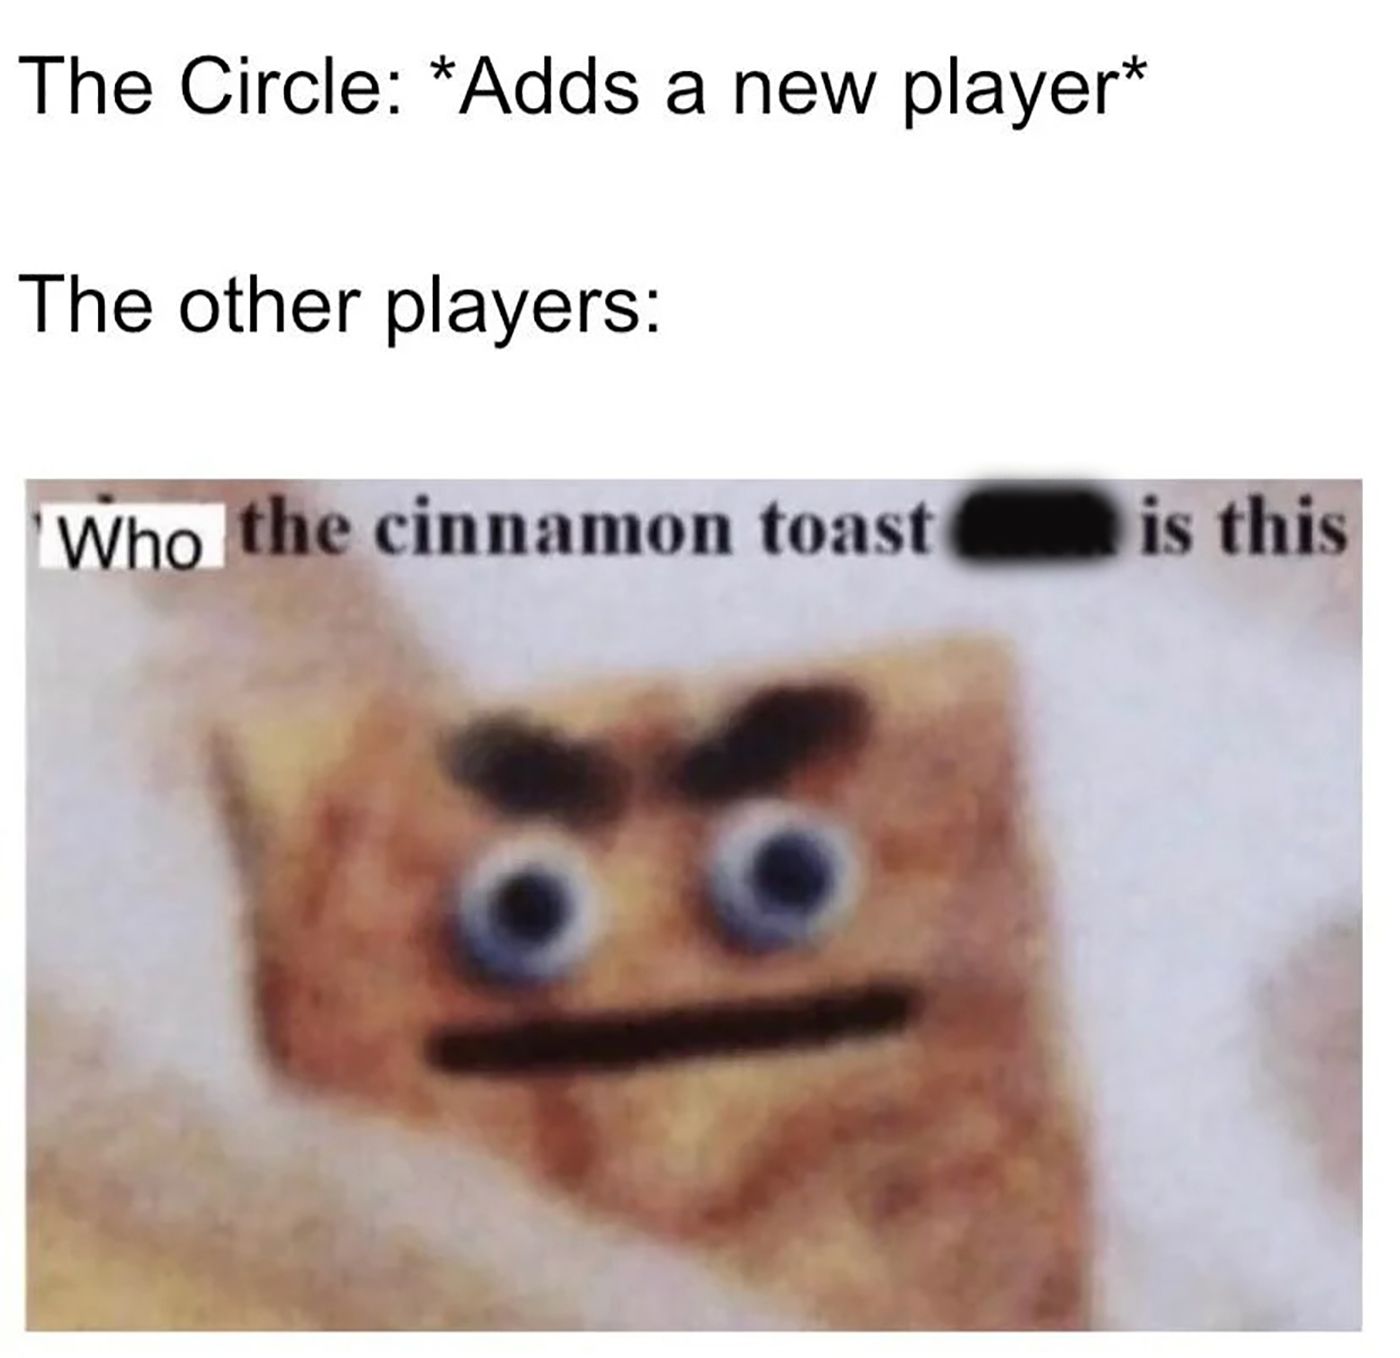 A meme about The Circle featuring a piece of Cinnamon Toast Crunch cereal.